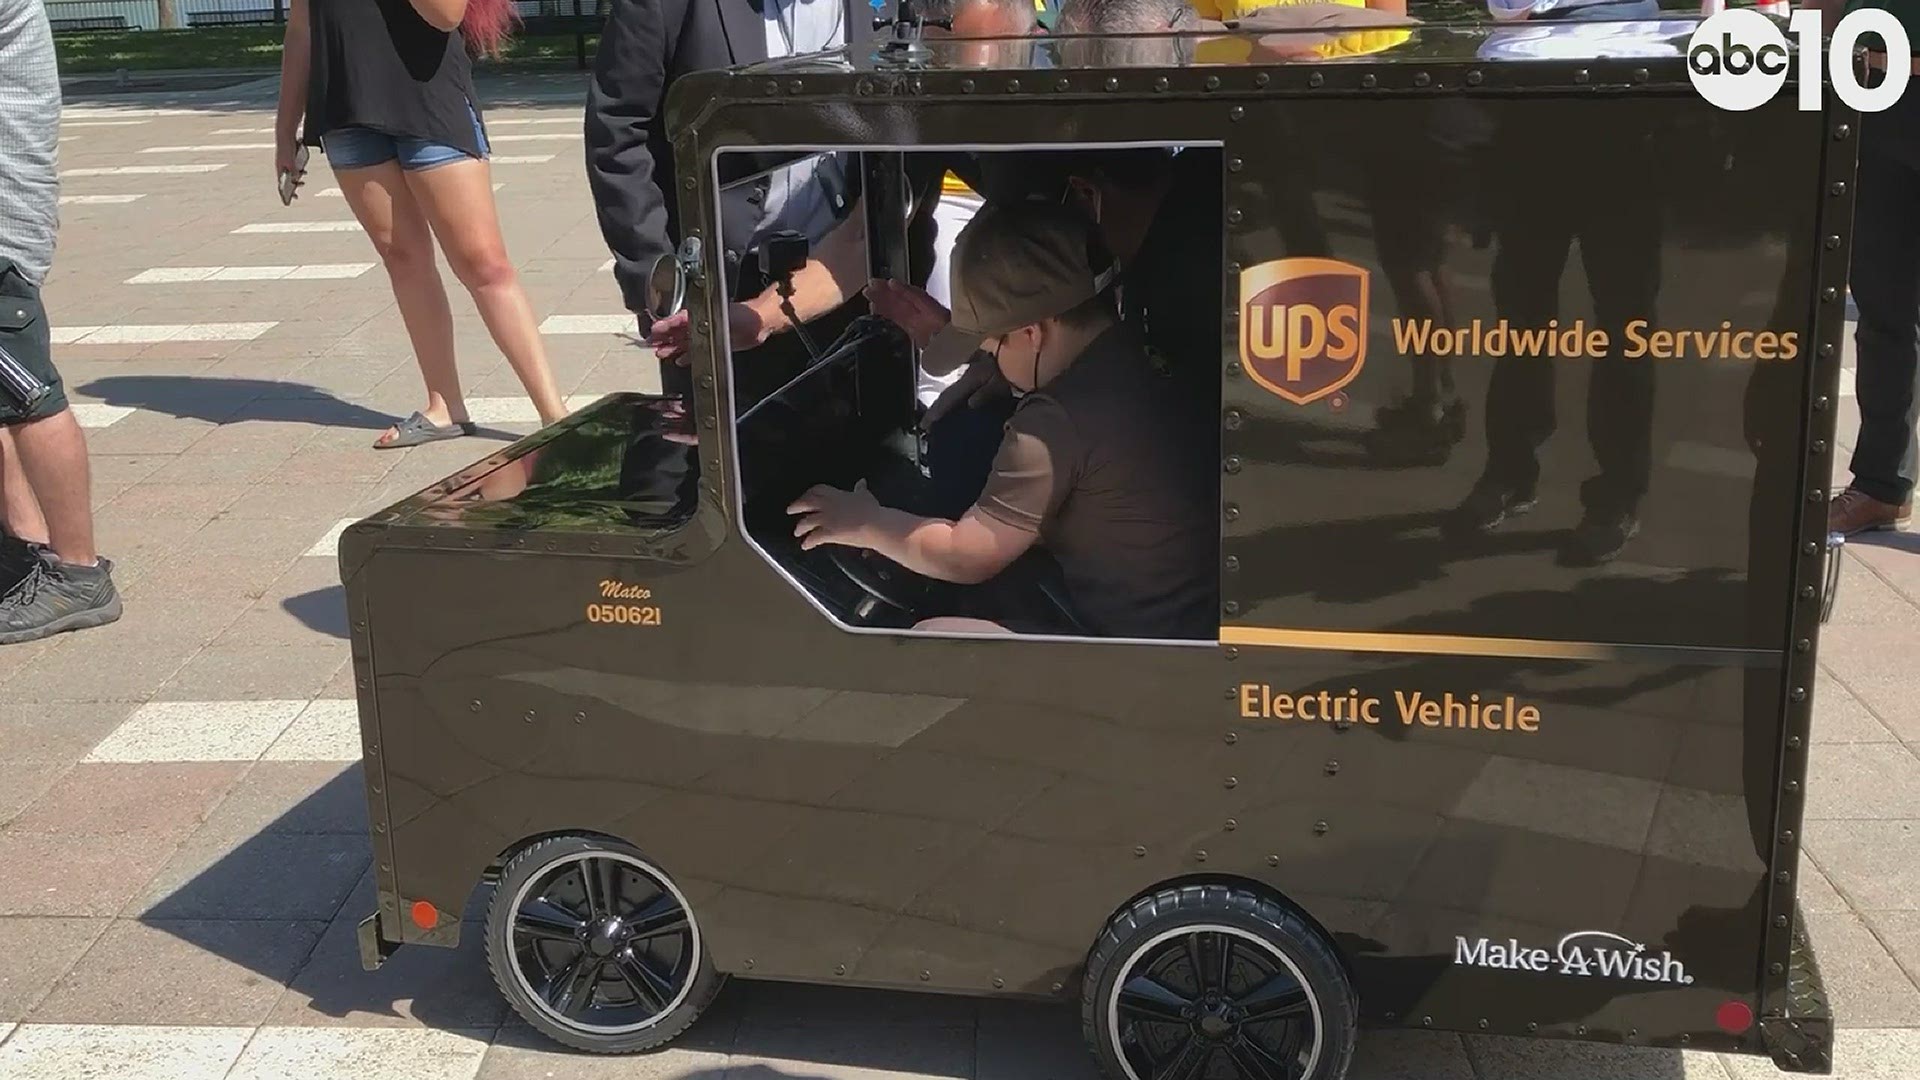 Mateo Toscano, 6, had his wish of becoming a UPS delivery man granted on Thursday when he got to deliver a little hope to the city of Stockton.